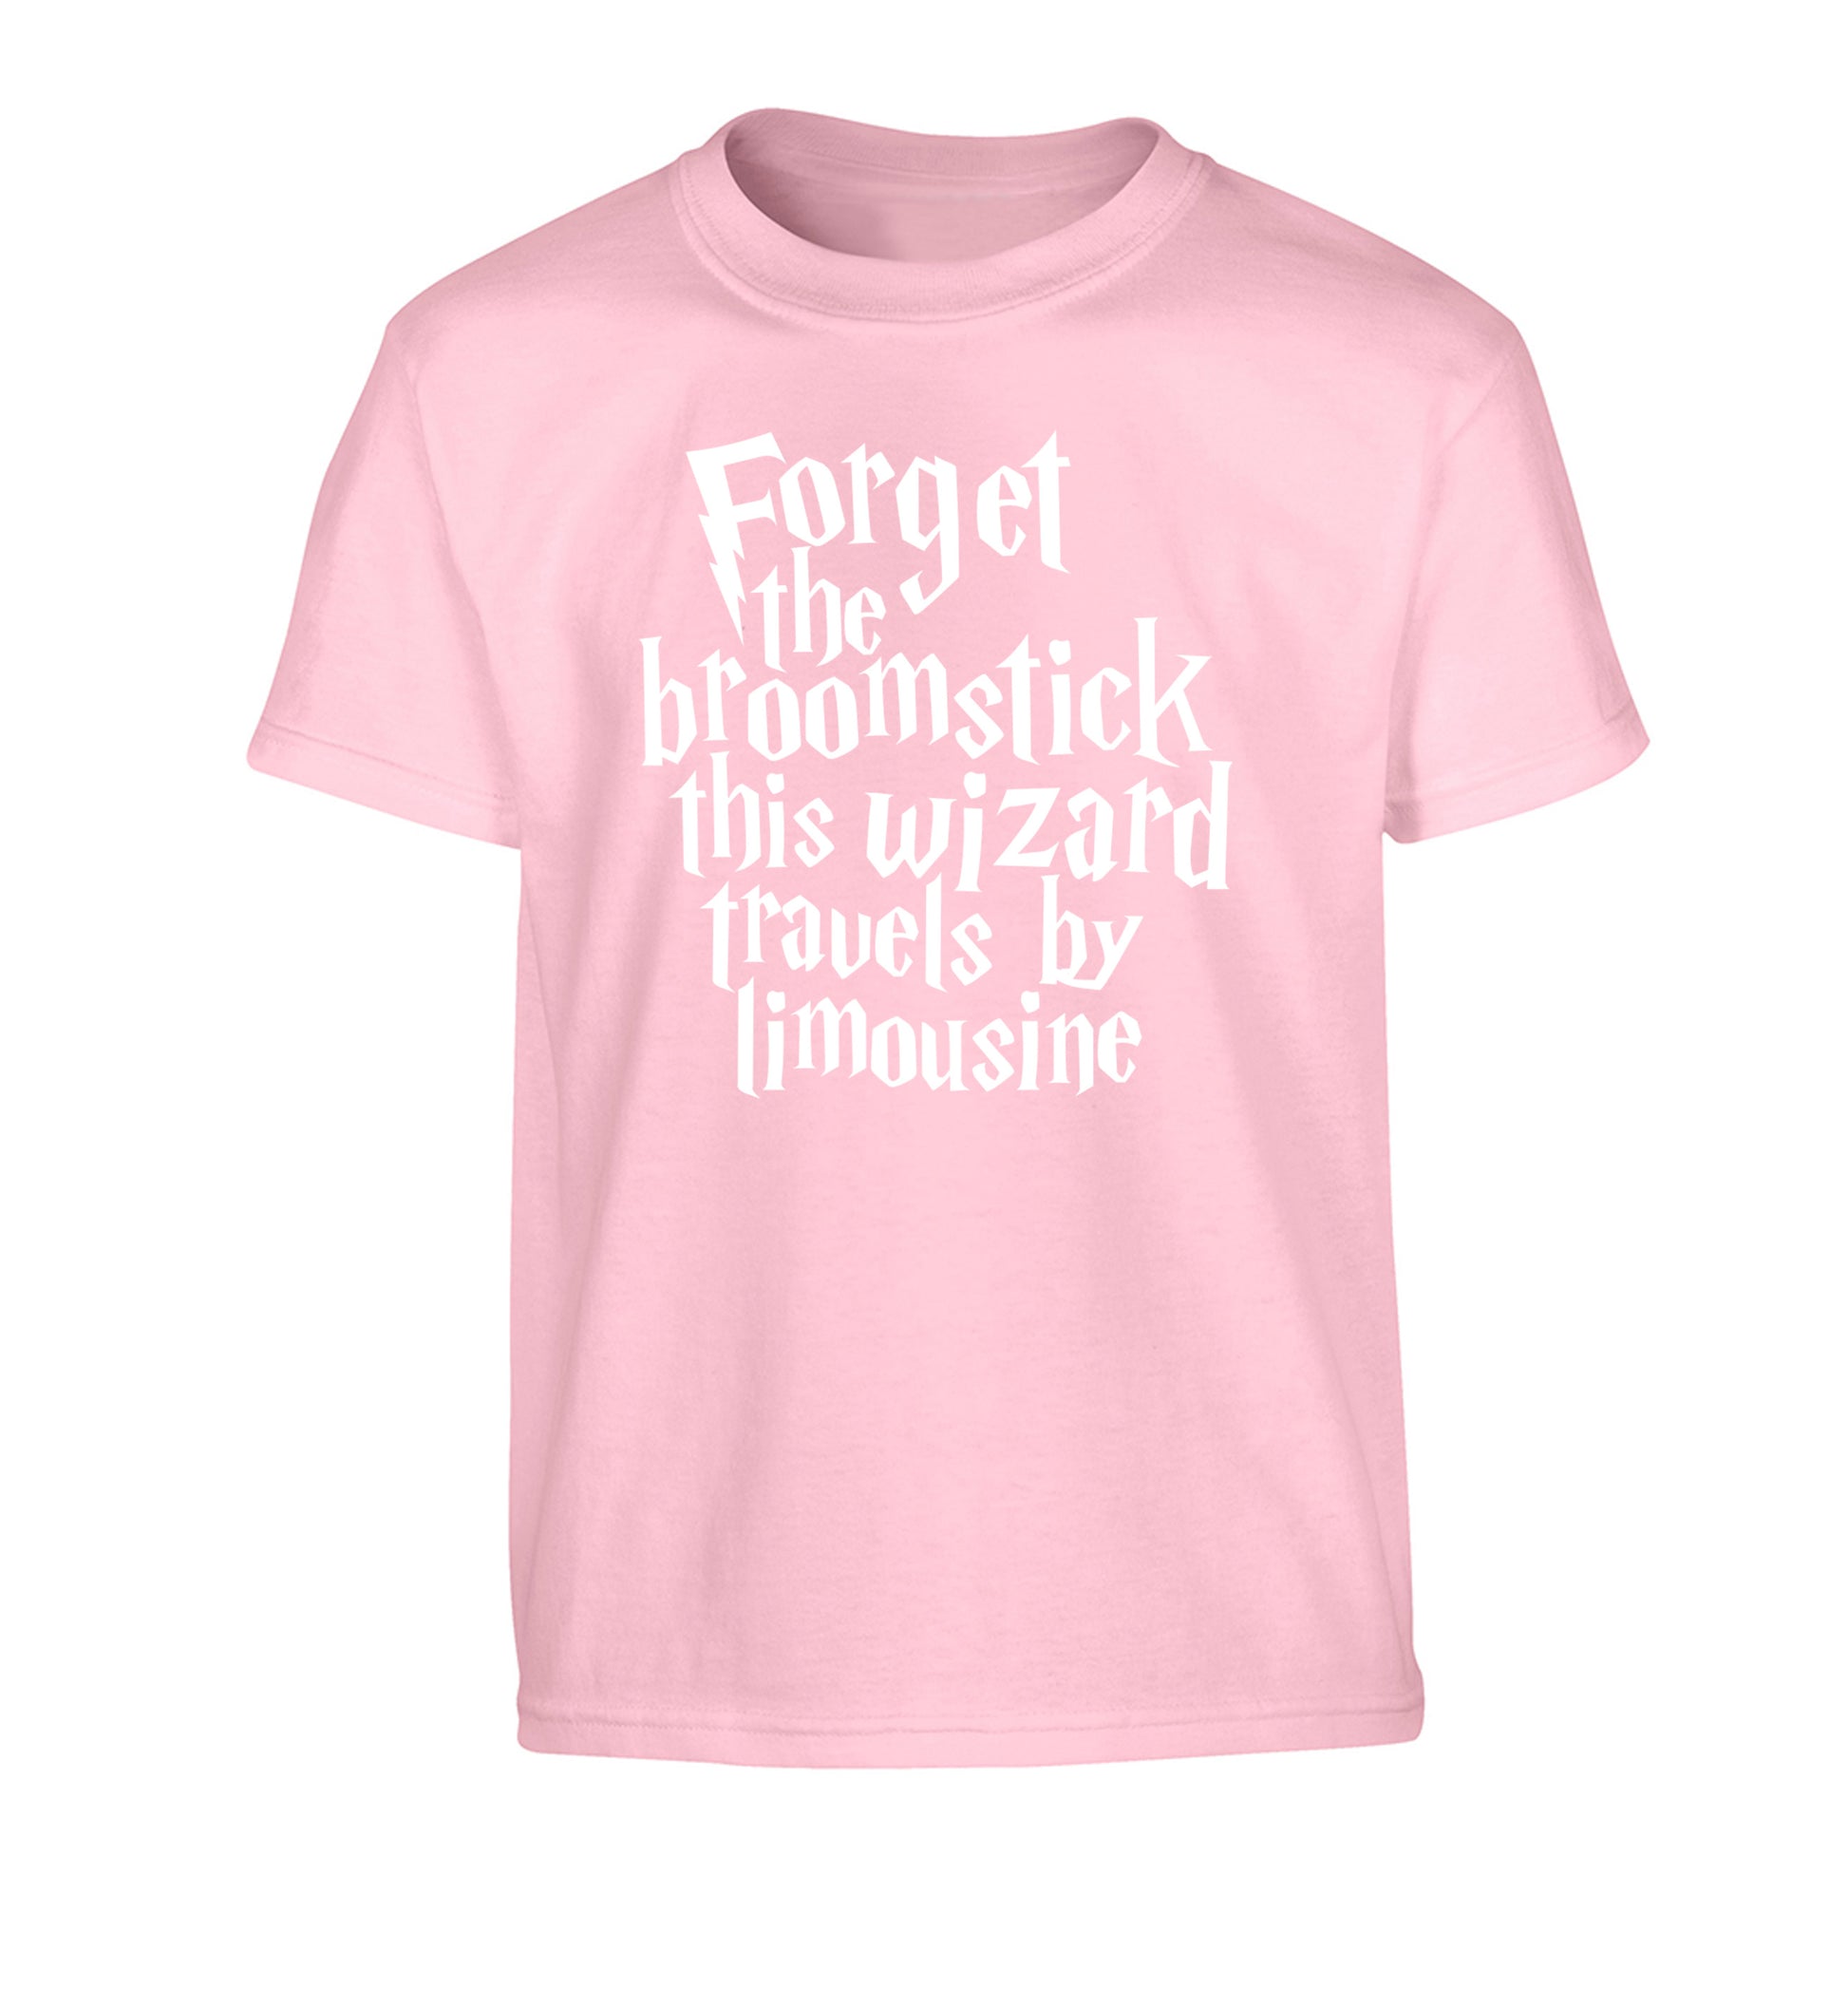 Forget the broomstick this wizard travels by limousine Children's light pink Tshirt 12-14 Years